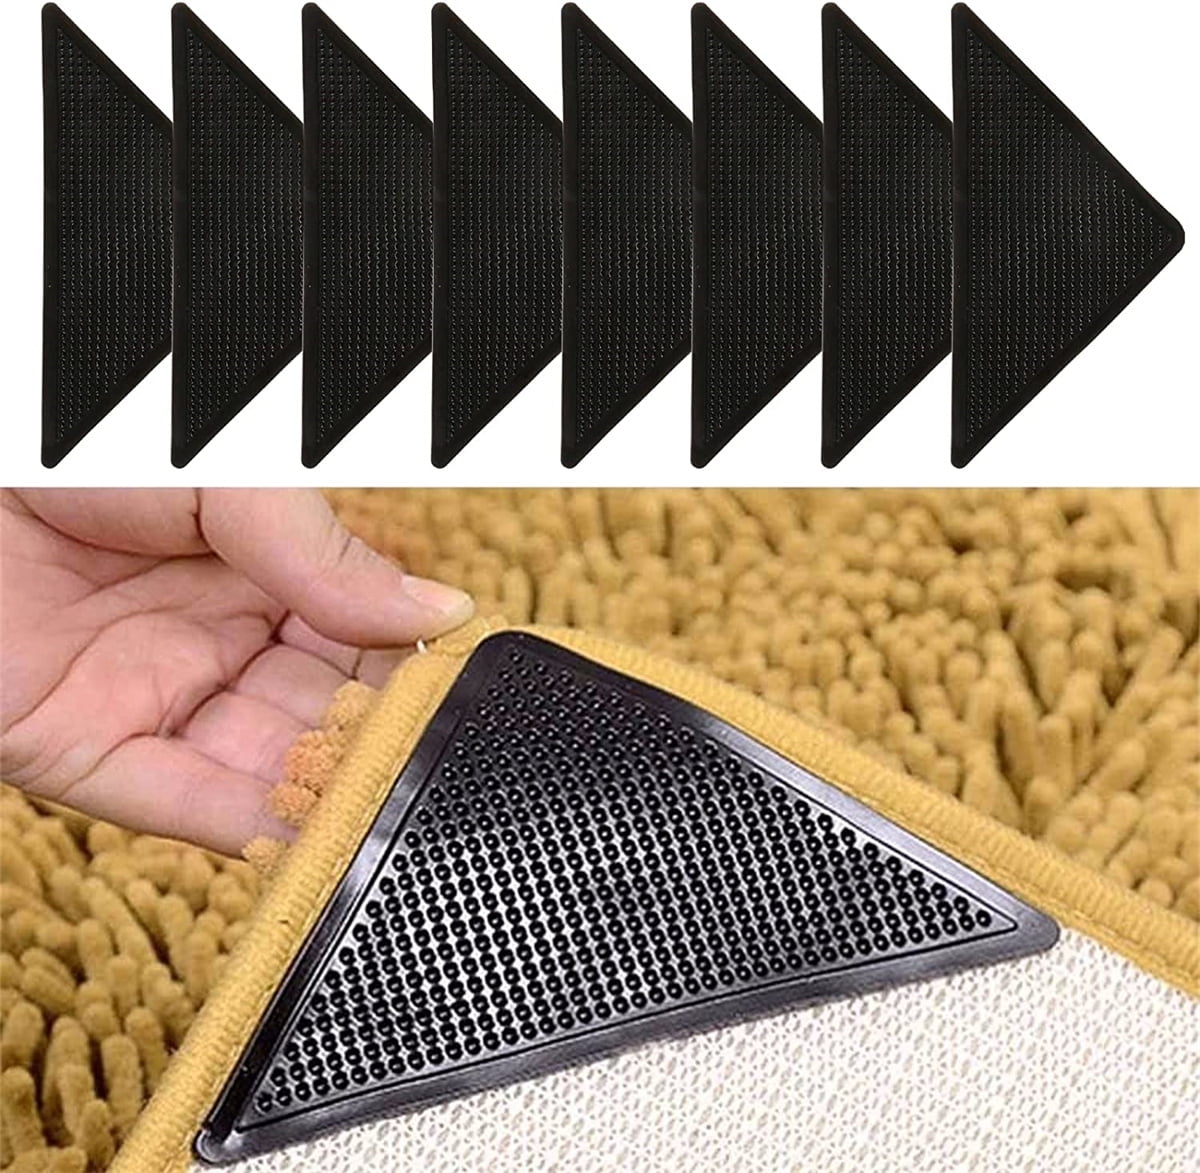 KISKIS Non Slip Rug Pad Underlay Rug Gripper, Provides Protection and Cushioning, Anti Skid Mat Keep Rugs in Place for Carpet Area Rugs,24x39